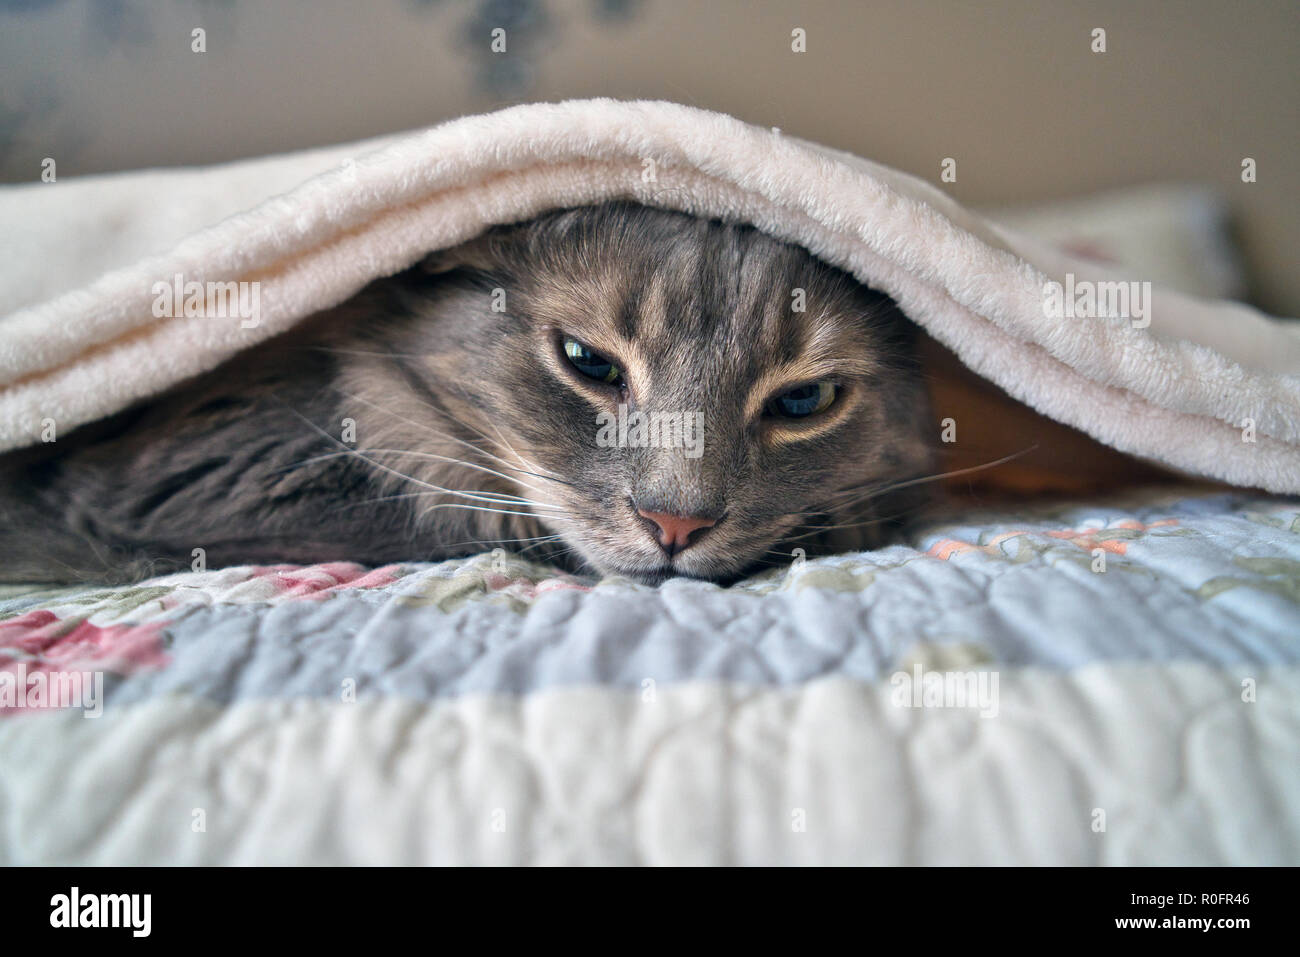 Montreal,Canada, 30 September, 2018.Cat taking a cat-nap underneath bed covers. Credit:Mario Beauregard/Alamy Live News Stock Photo